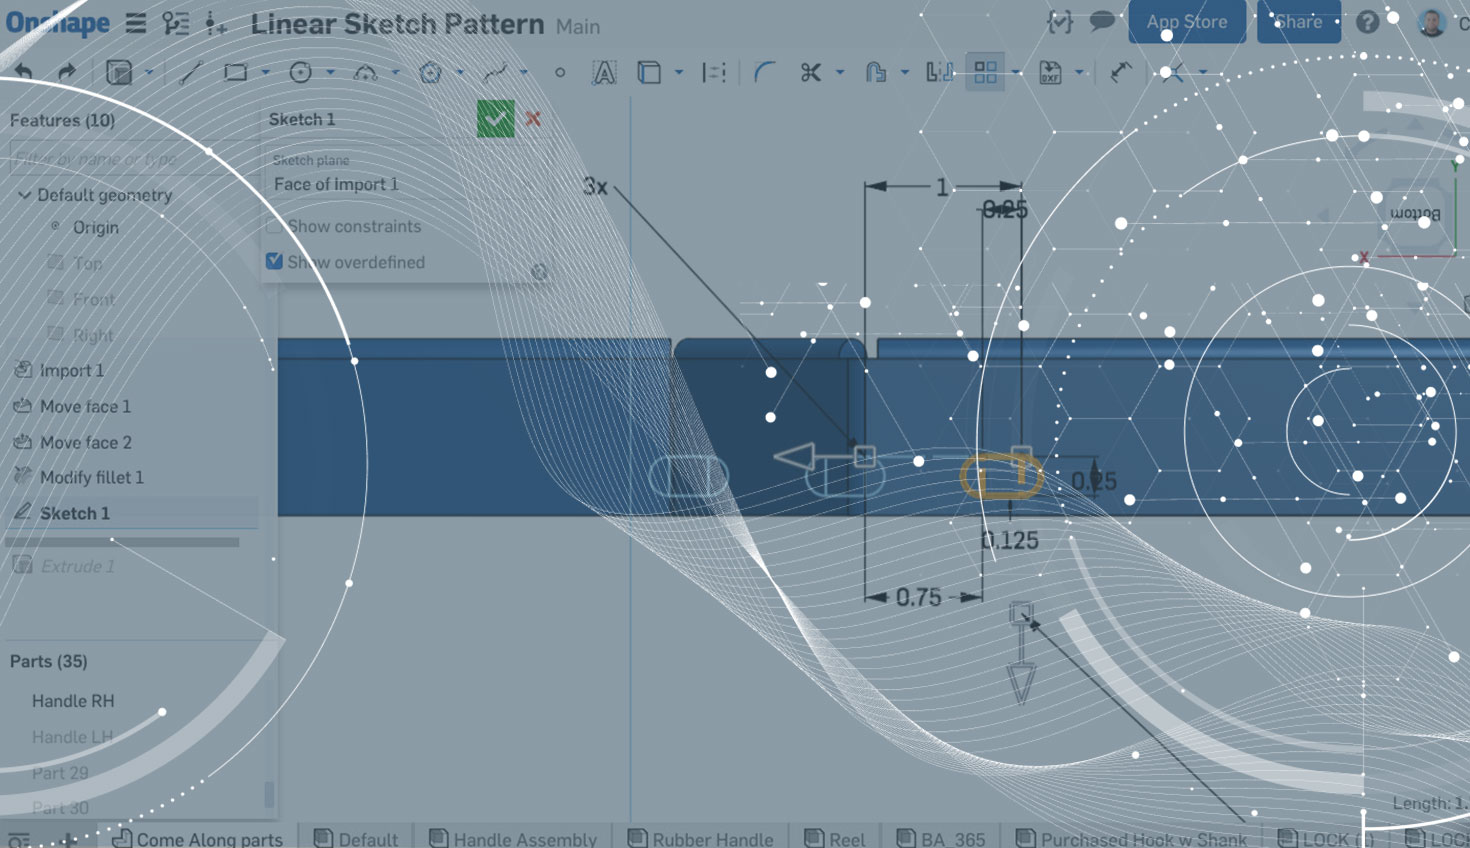 Sketch Driven Pattern in SolidWorks - YouTube